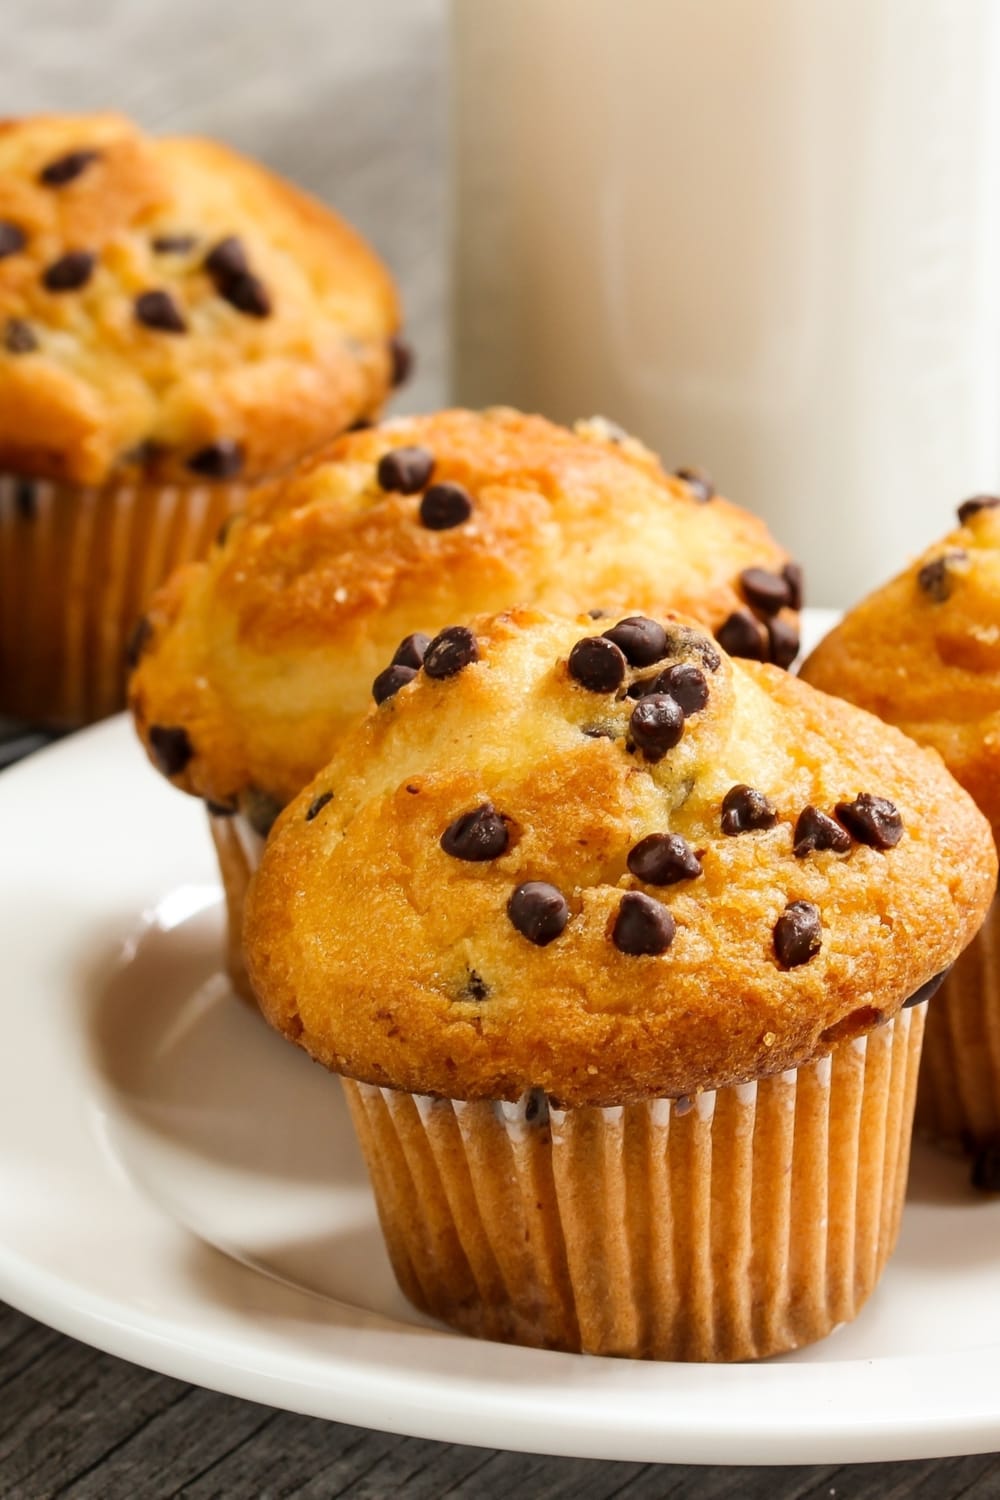 Chocolate Chip Muffins with a glass of milk in the background.